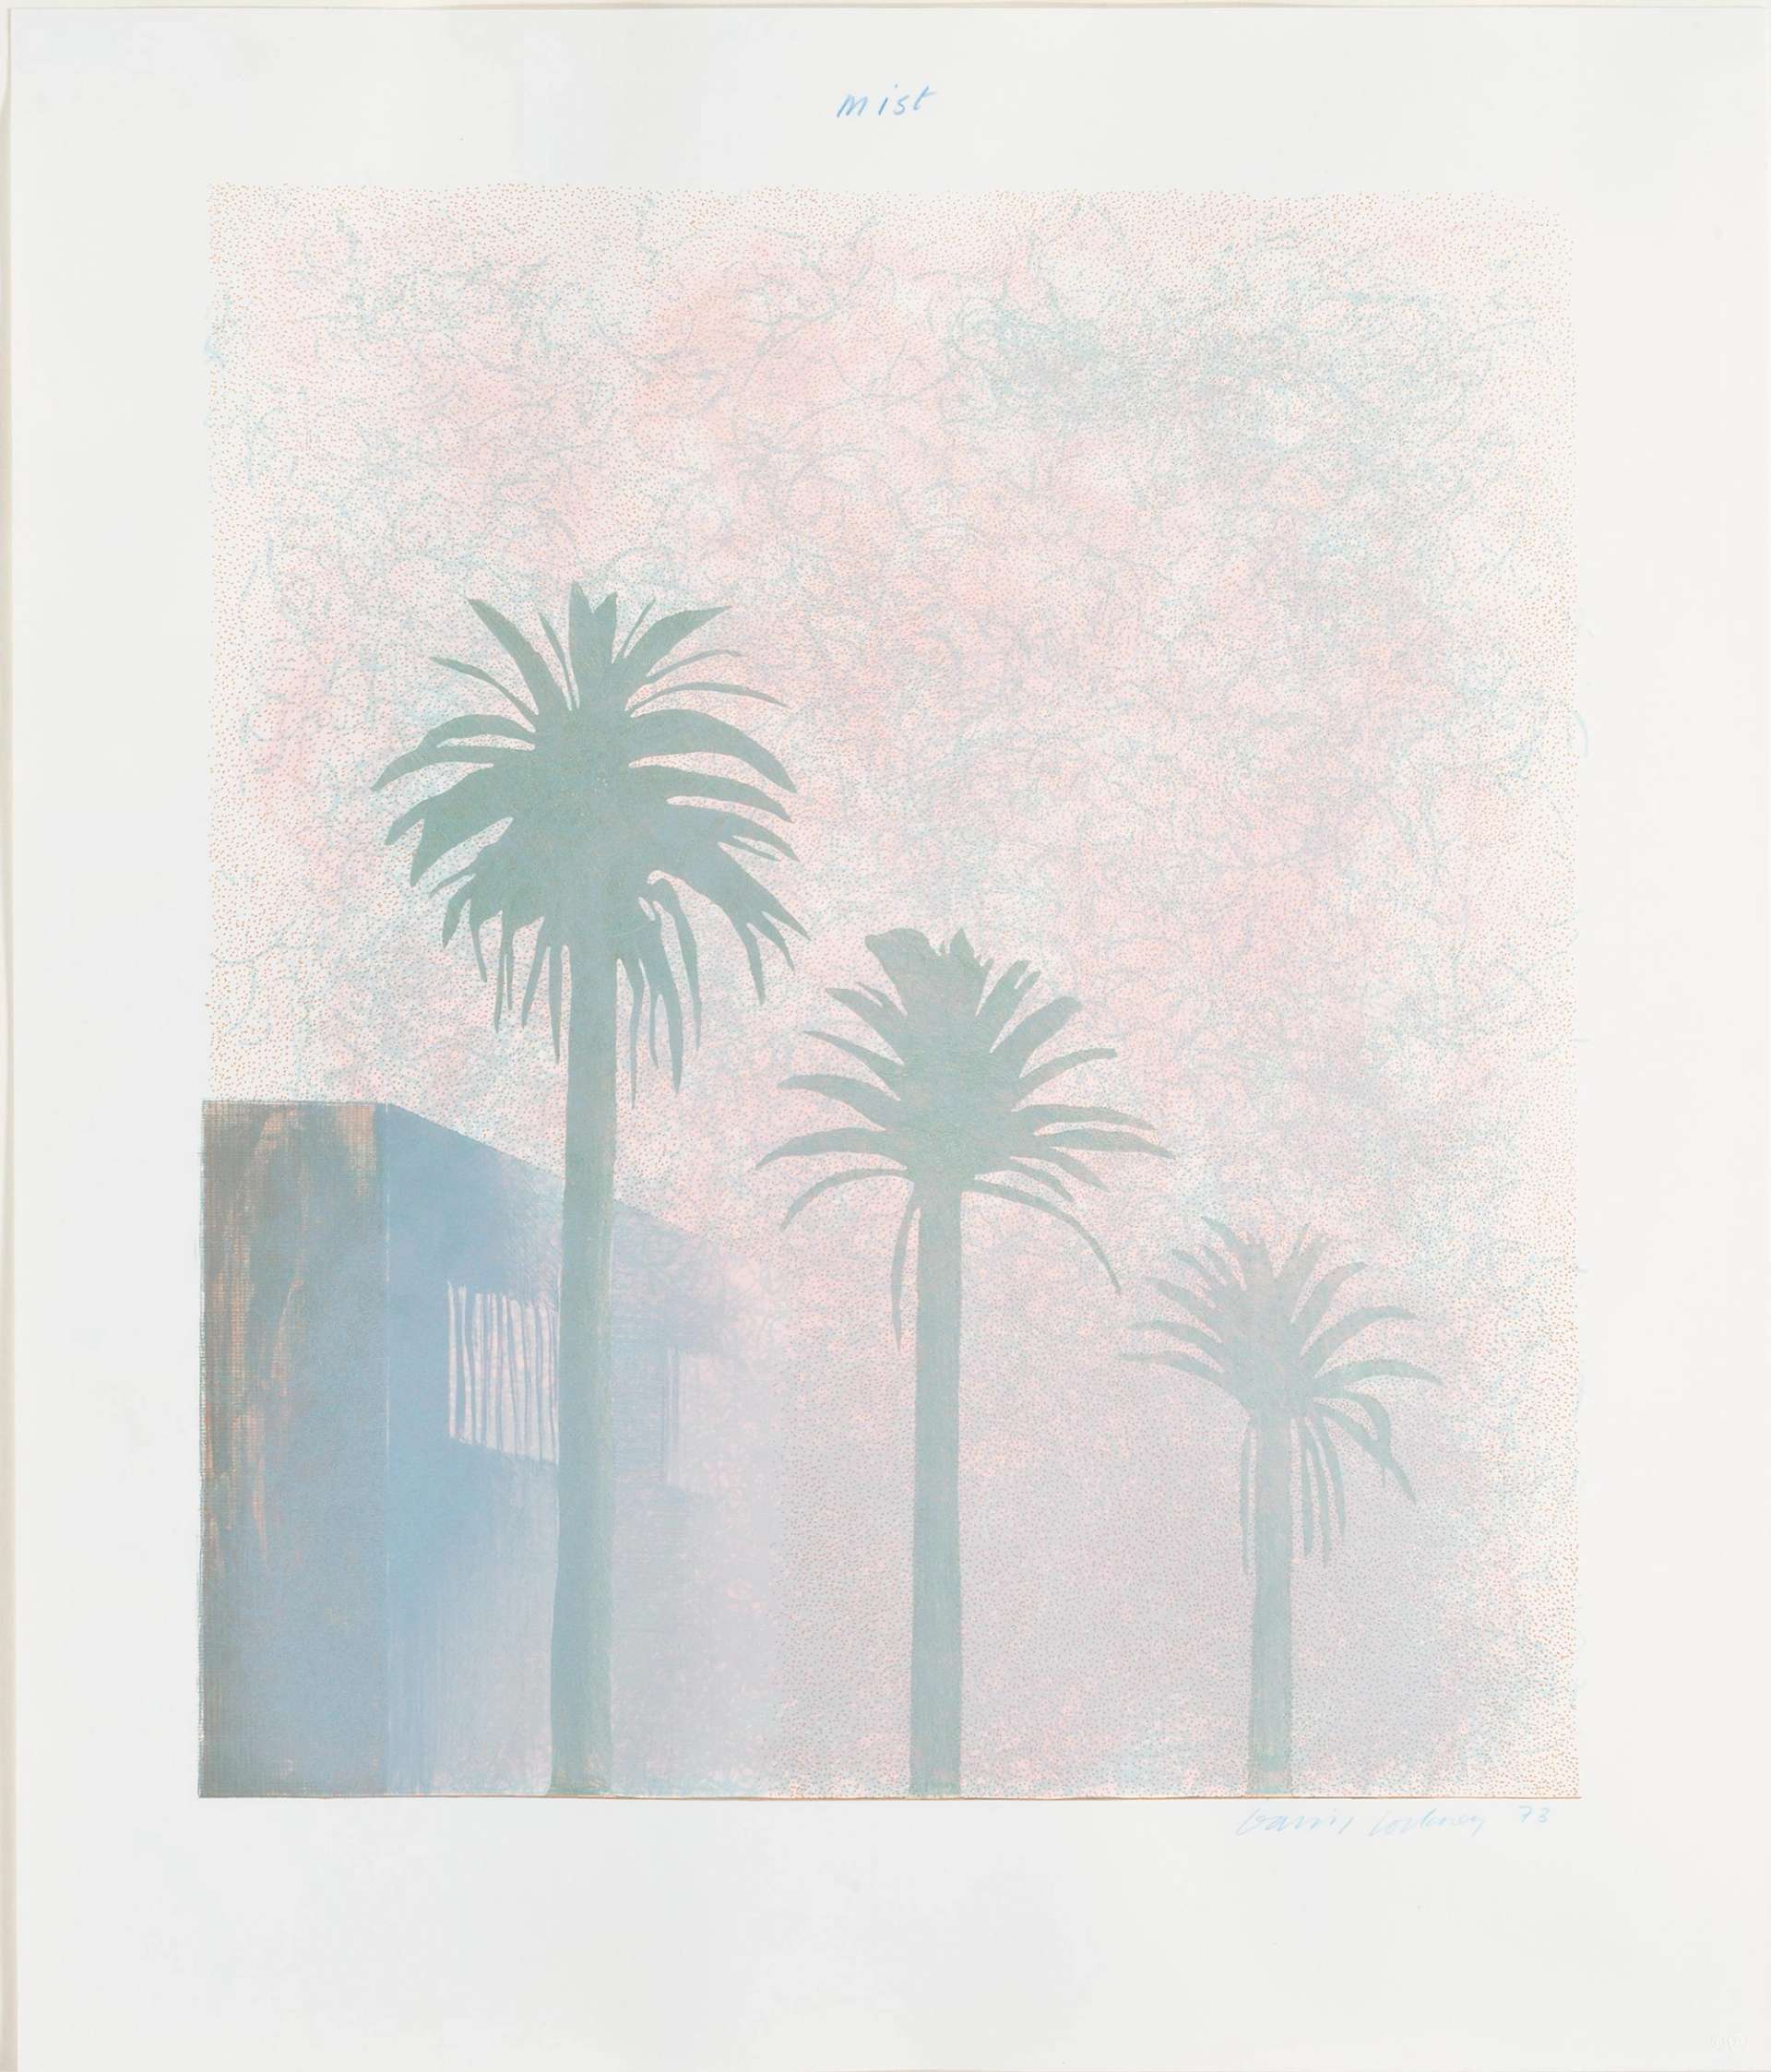 Featuring LA’s iconic palm trees, Mist is a work by David Hockney. Receding into the distance the trees frame a low flat roofed building at the left of the composition while the mist of the title suffuses the scene in a soft pink and grey glow. 